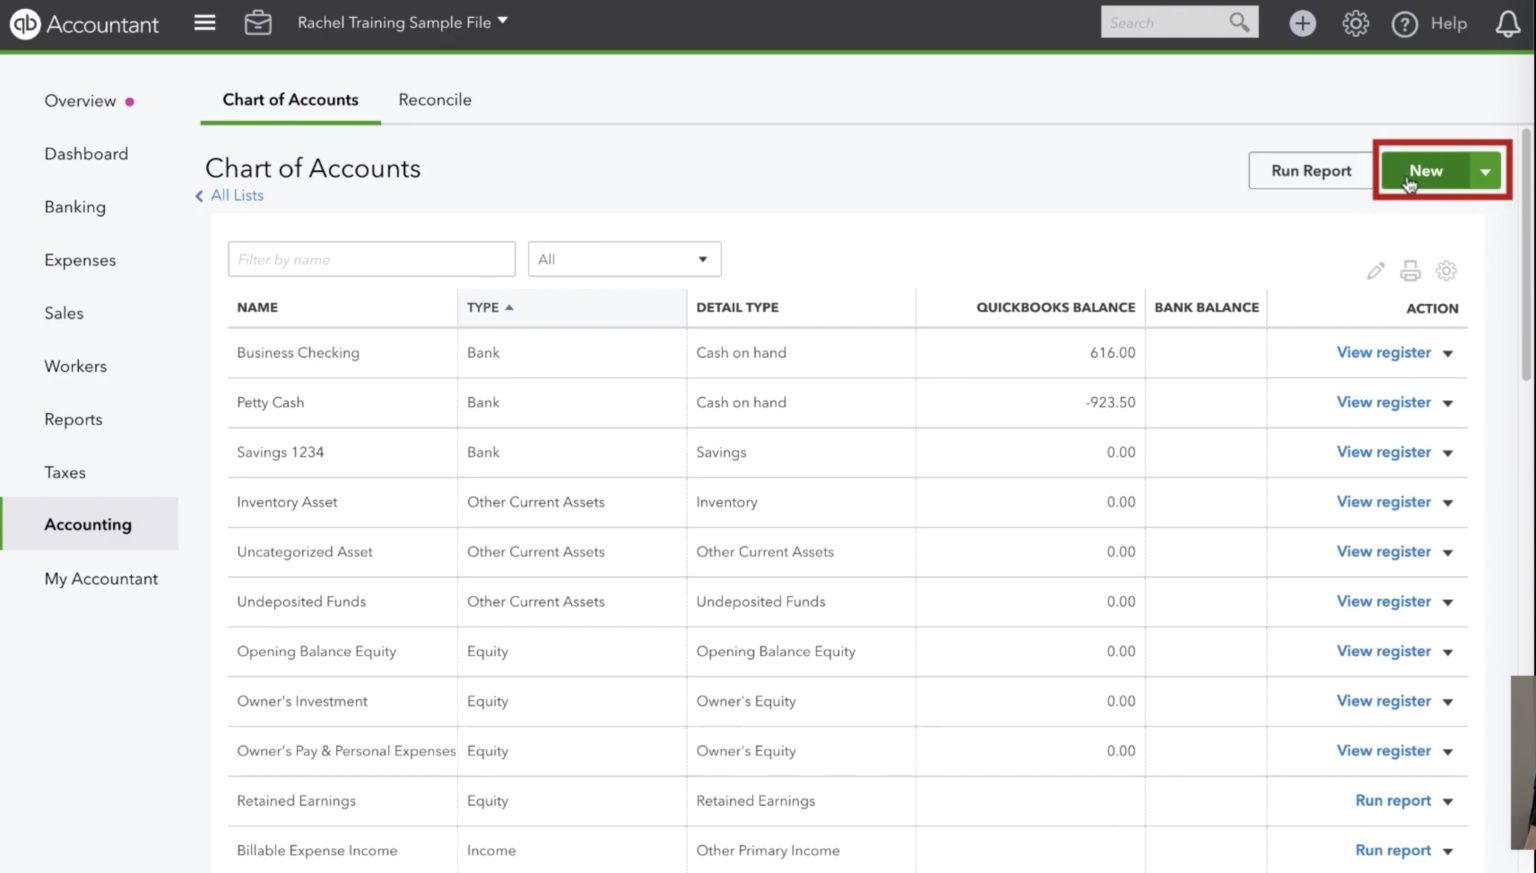 How To Add an Account to the Chart of Accounts in QuickBooks Online